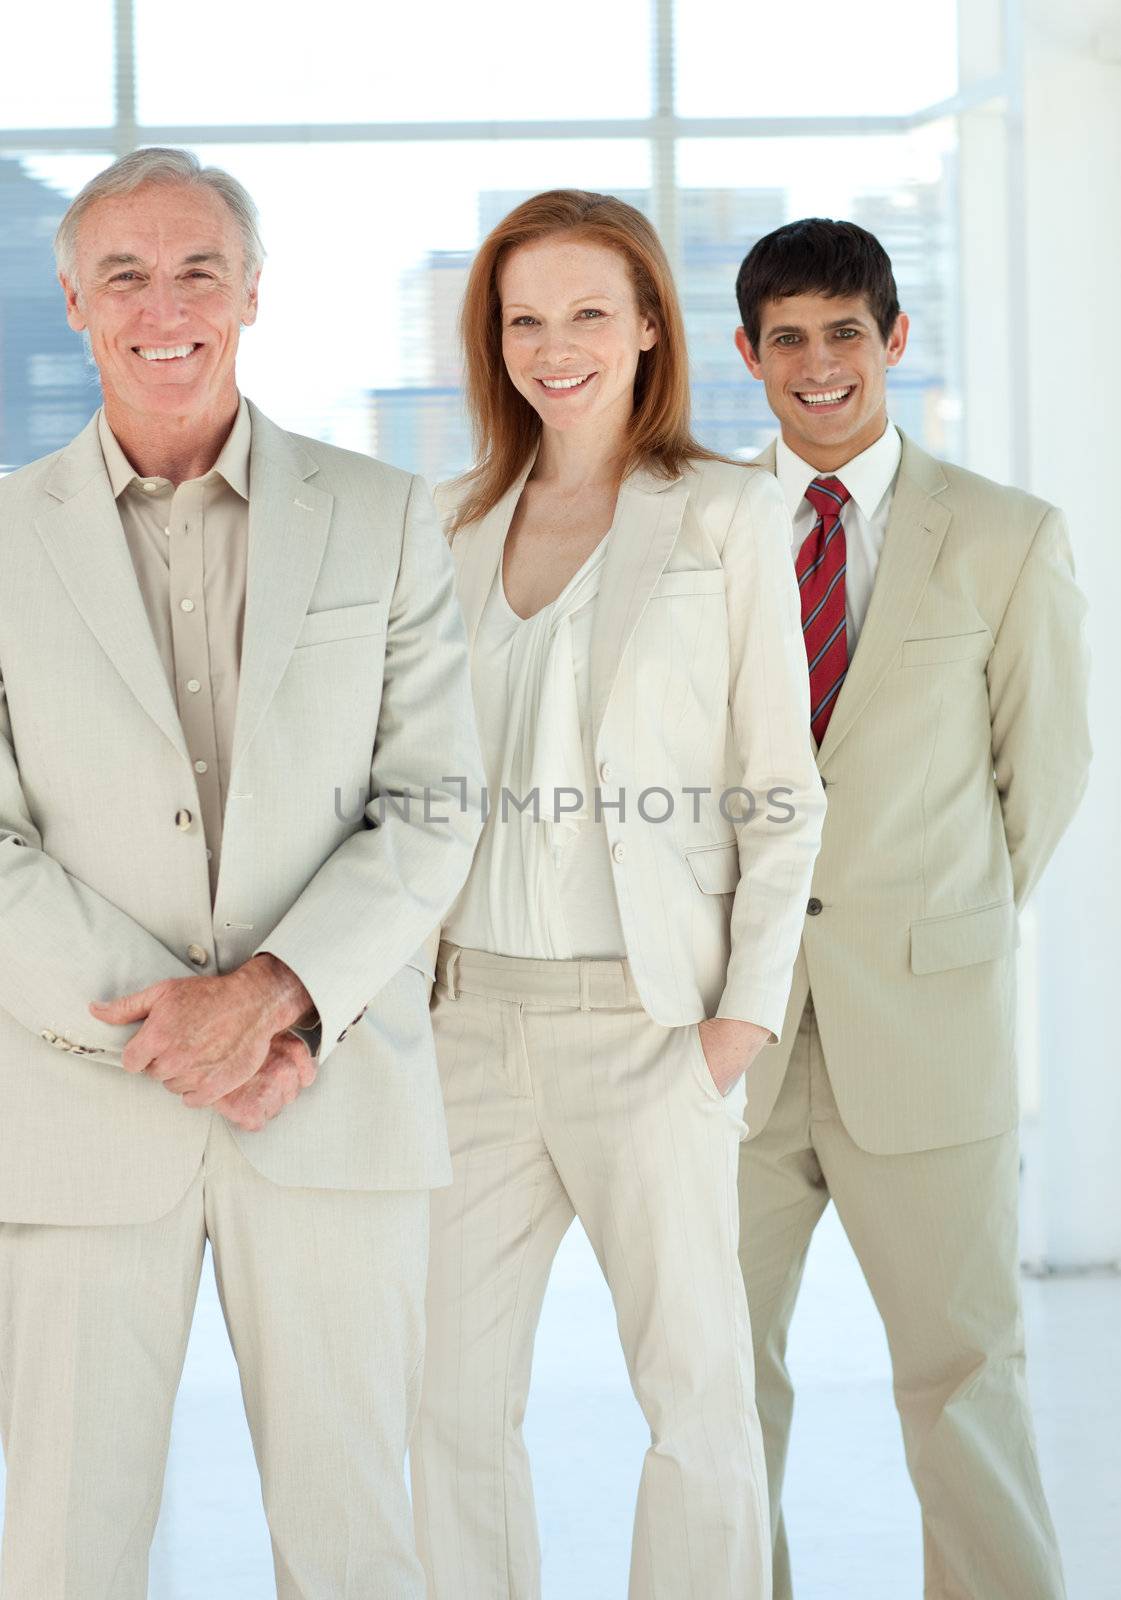 Confident business people standing together in a business building